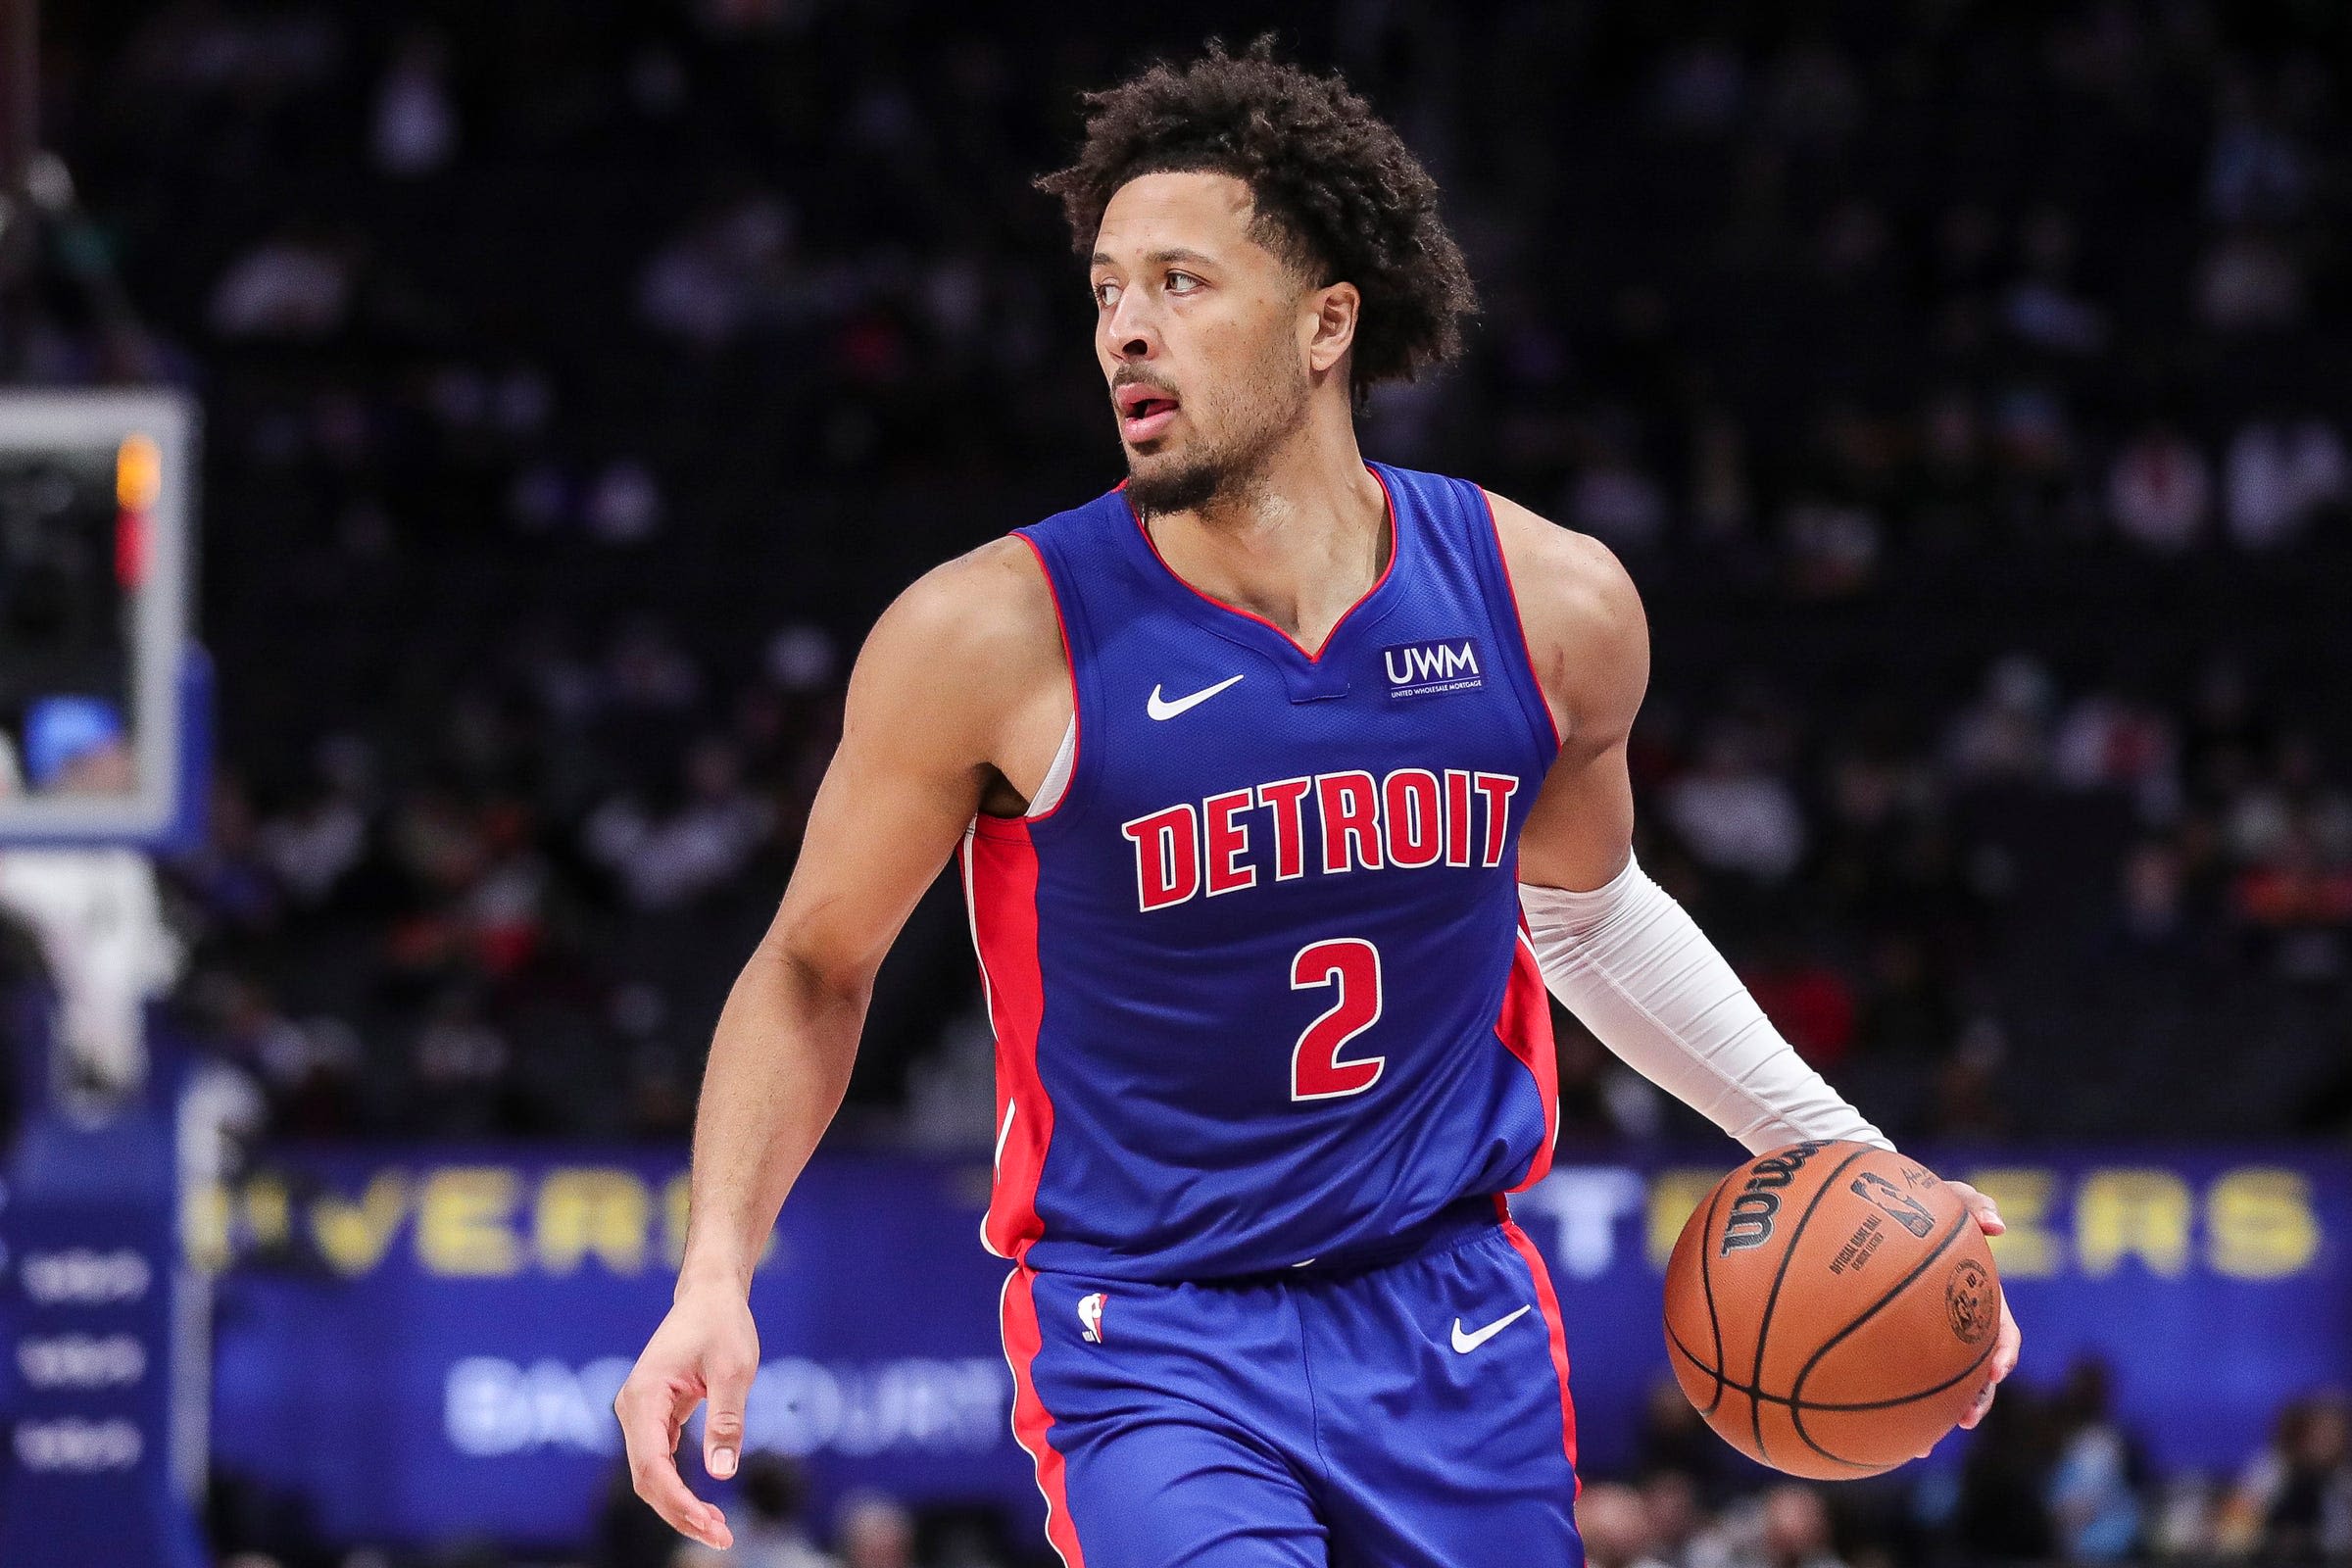 Cade Cunningham only Detroit Pistons player named among NBA's top 25 under age 25